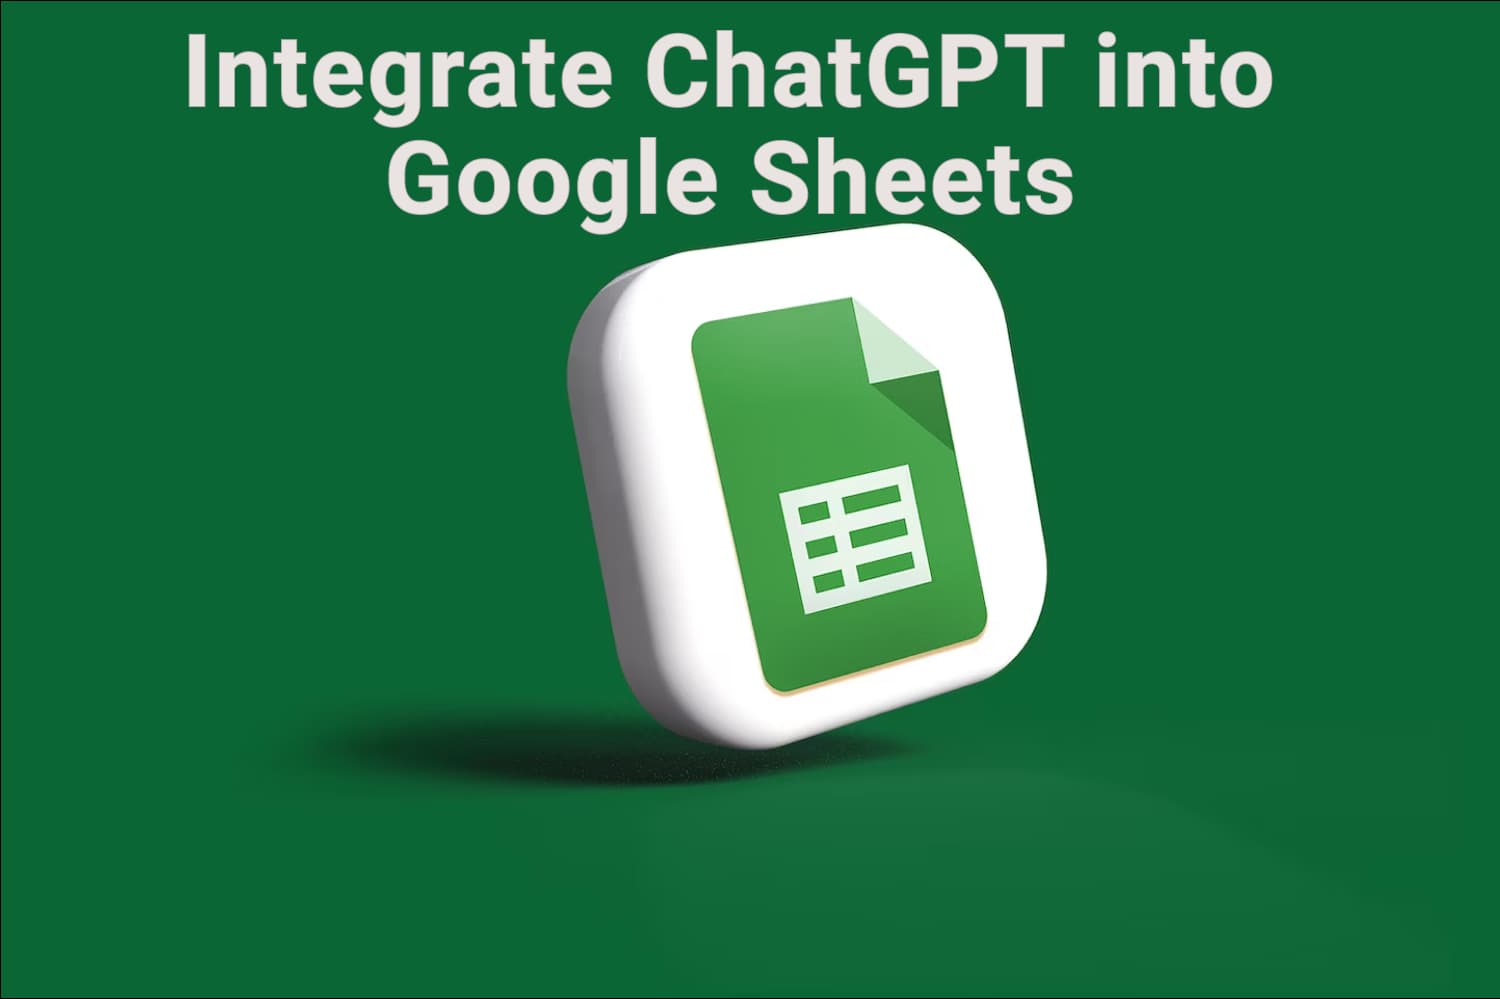 Google Sheet icon with "Integrate ChatGPT into google sheets" written on top of image.